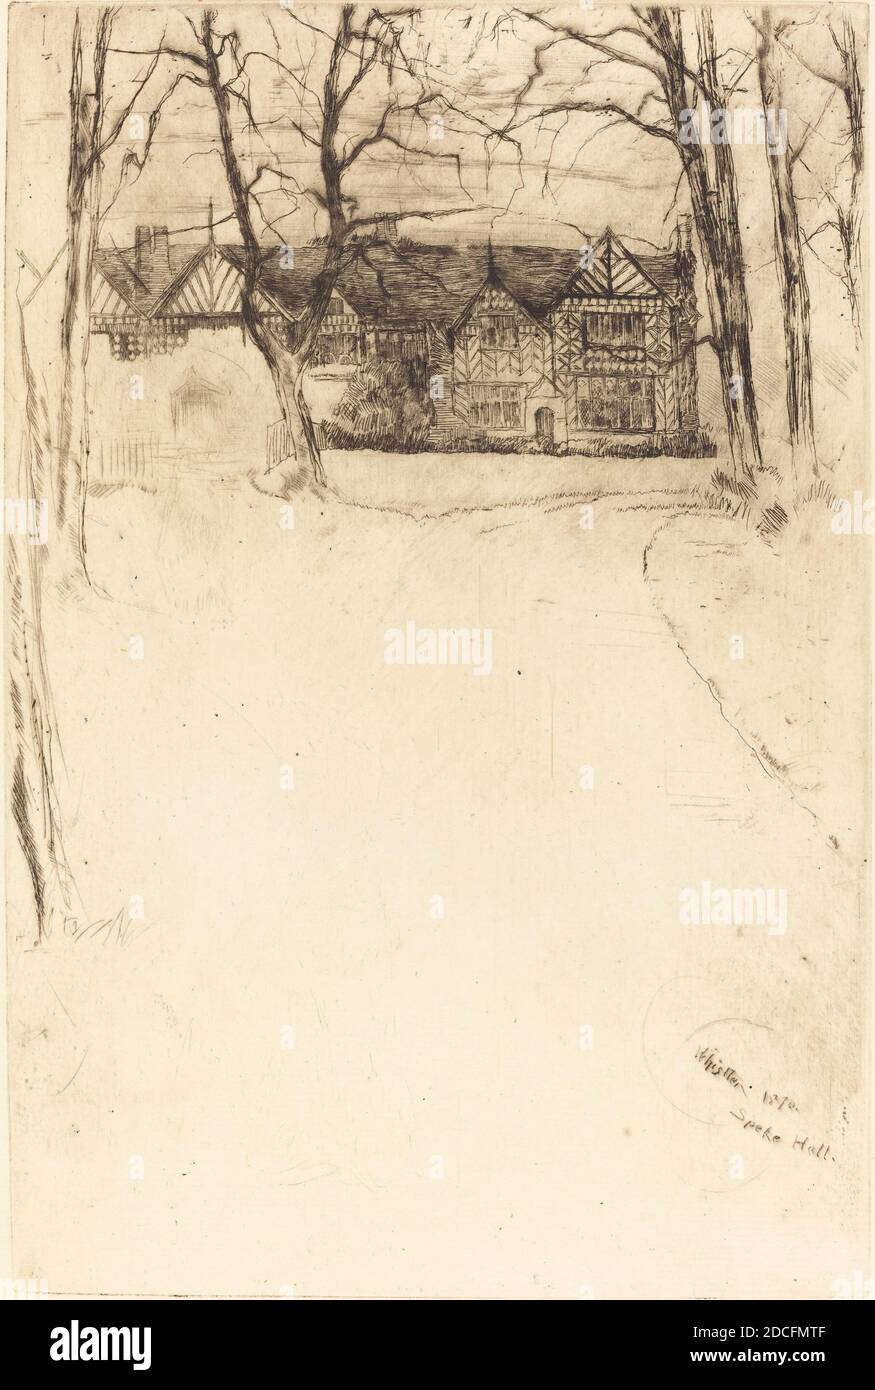 James McNeill Whistler, (artist), American, 1834 - 1903, Speke Hall, No.1, 1870, etching and drypoint Stock Photo